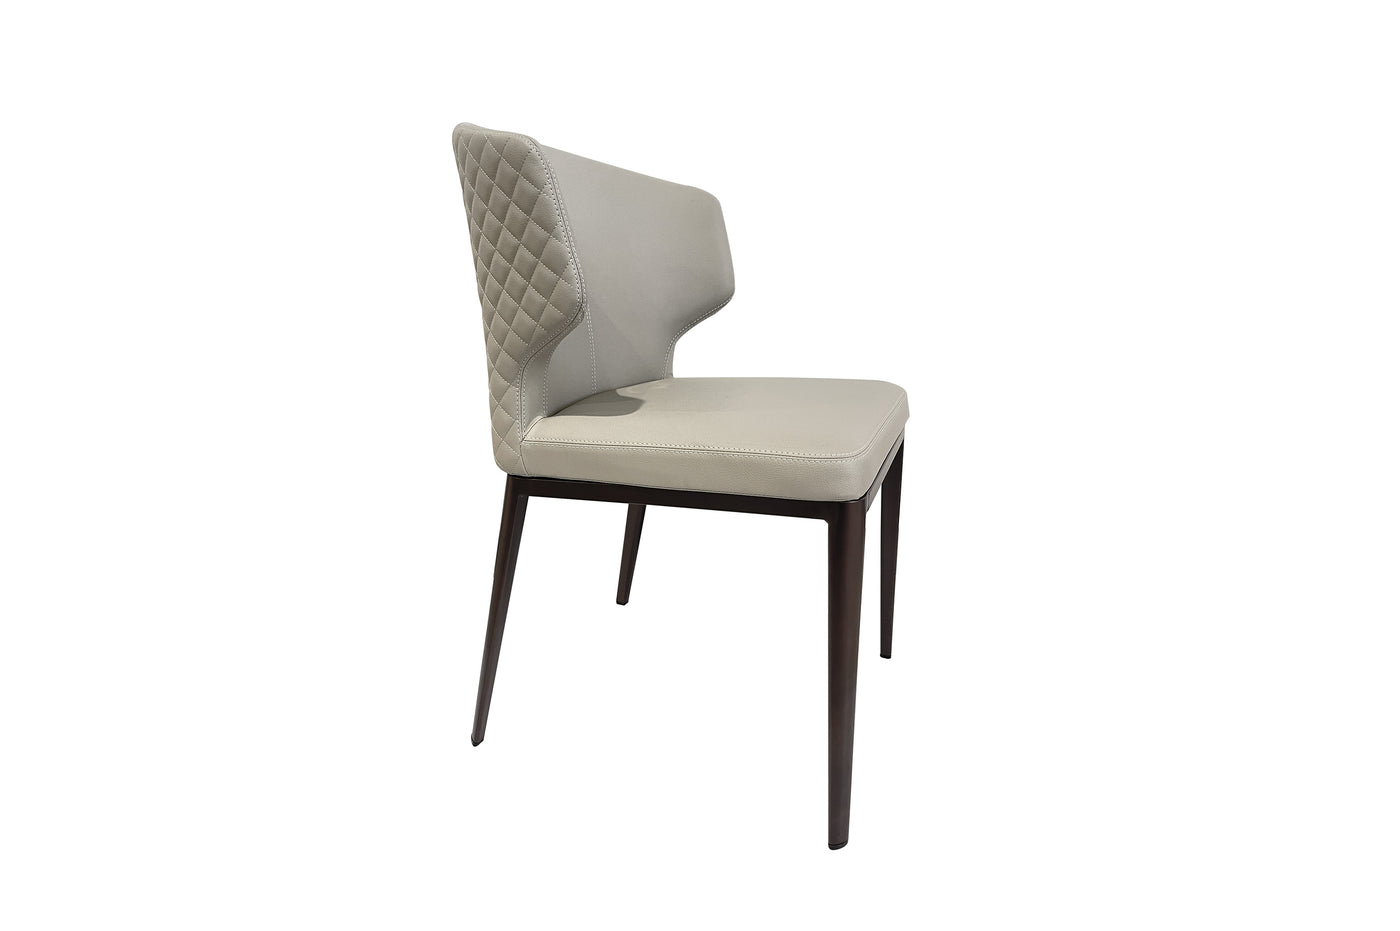 Evelyn chair dining chair - Cream Beige